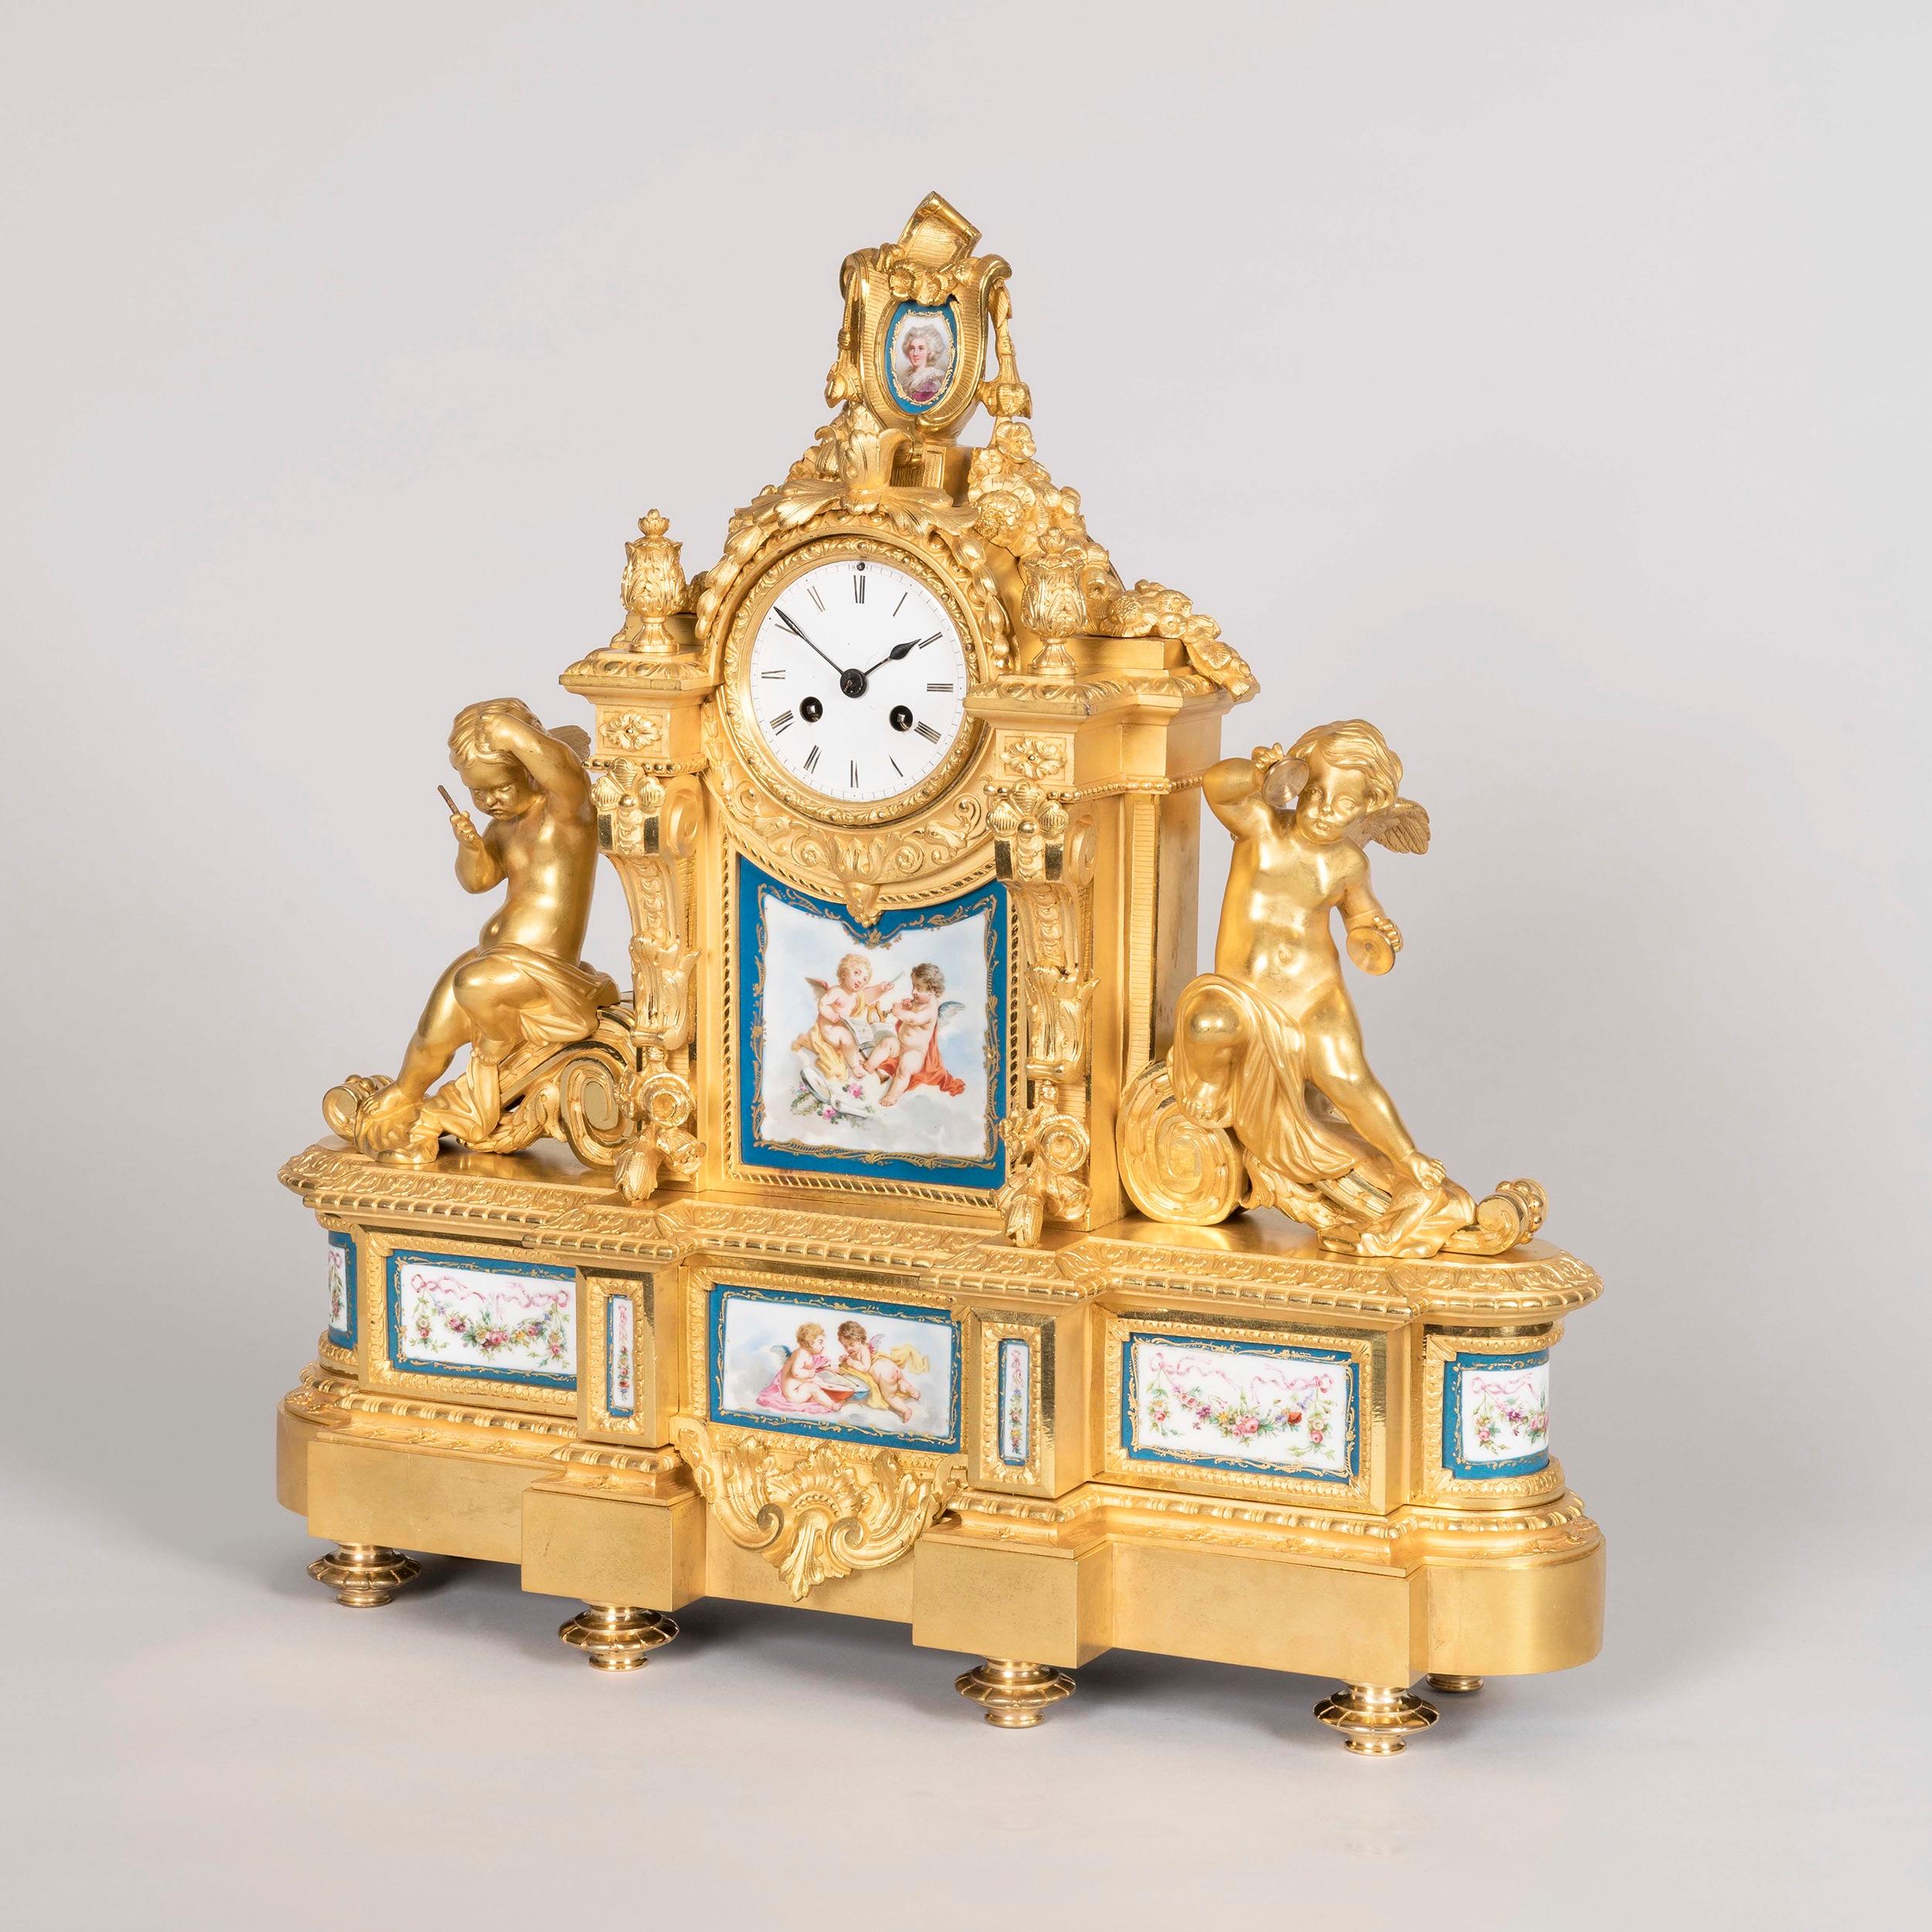 Ormolu 19th Century French Gilt Bronze and Porcelain Clock in the Louis XVI Taste For Sale